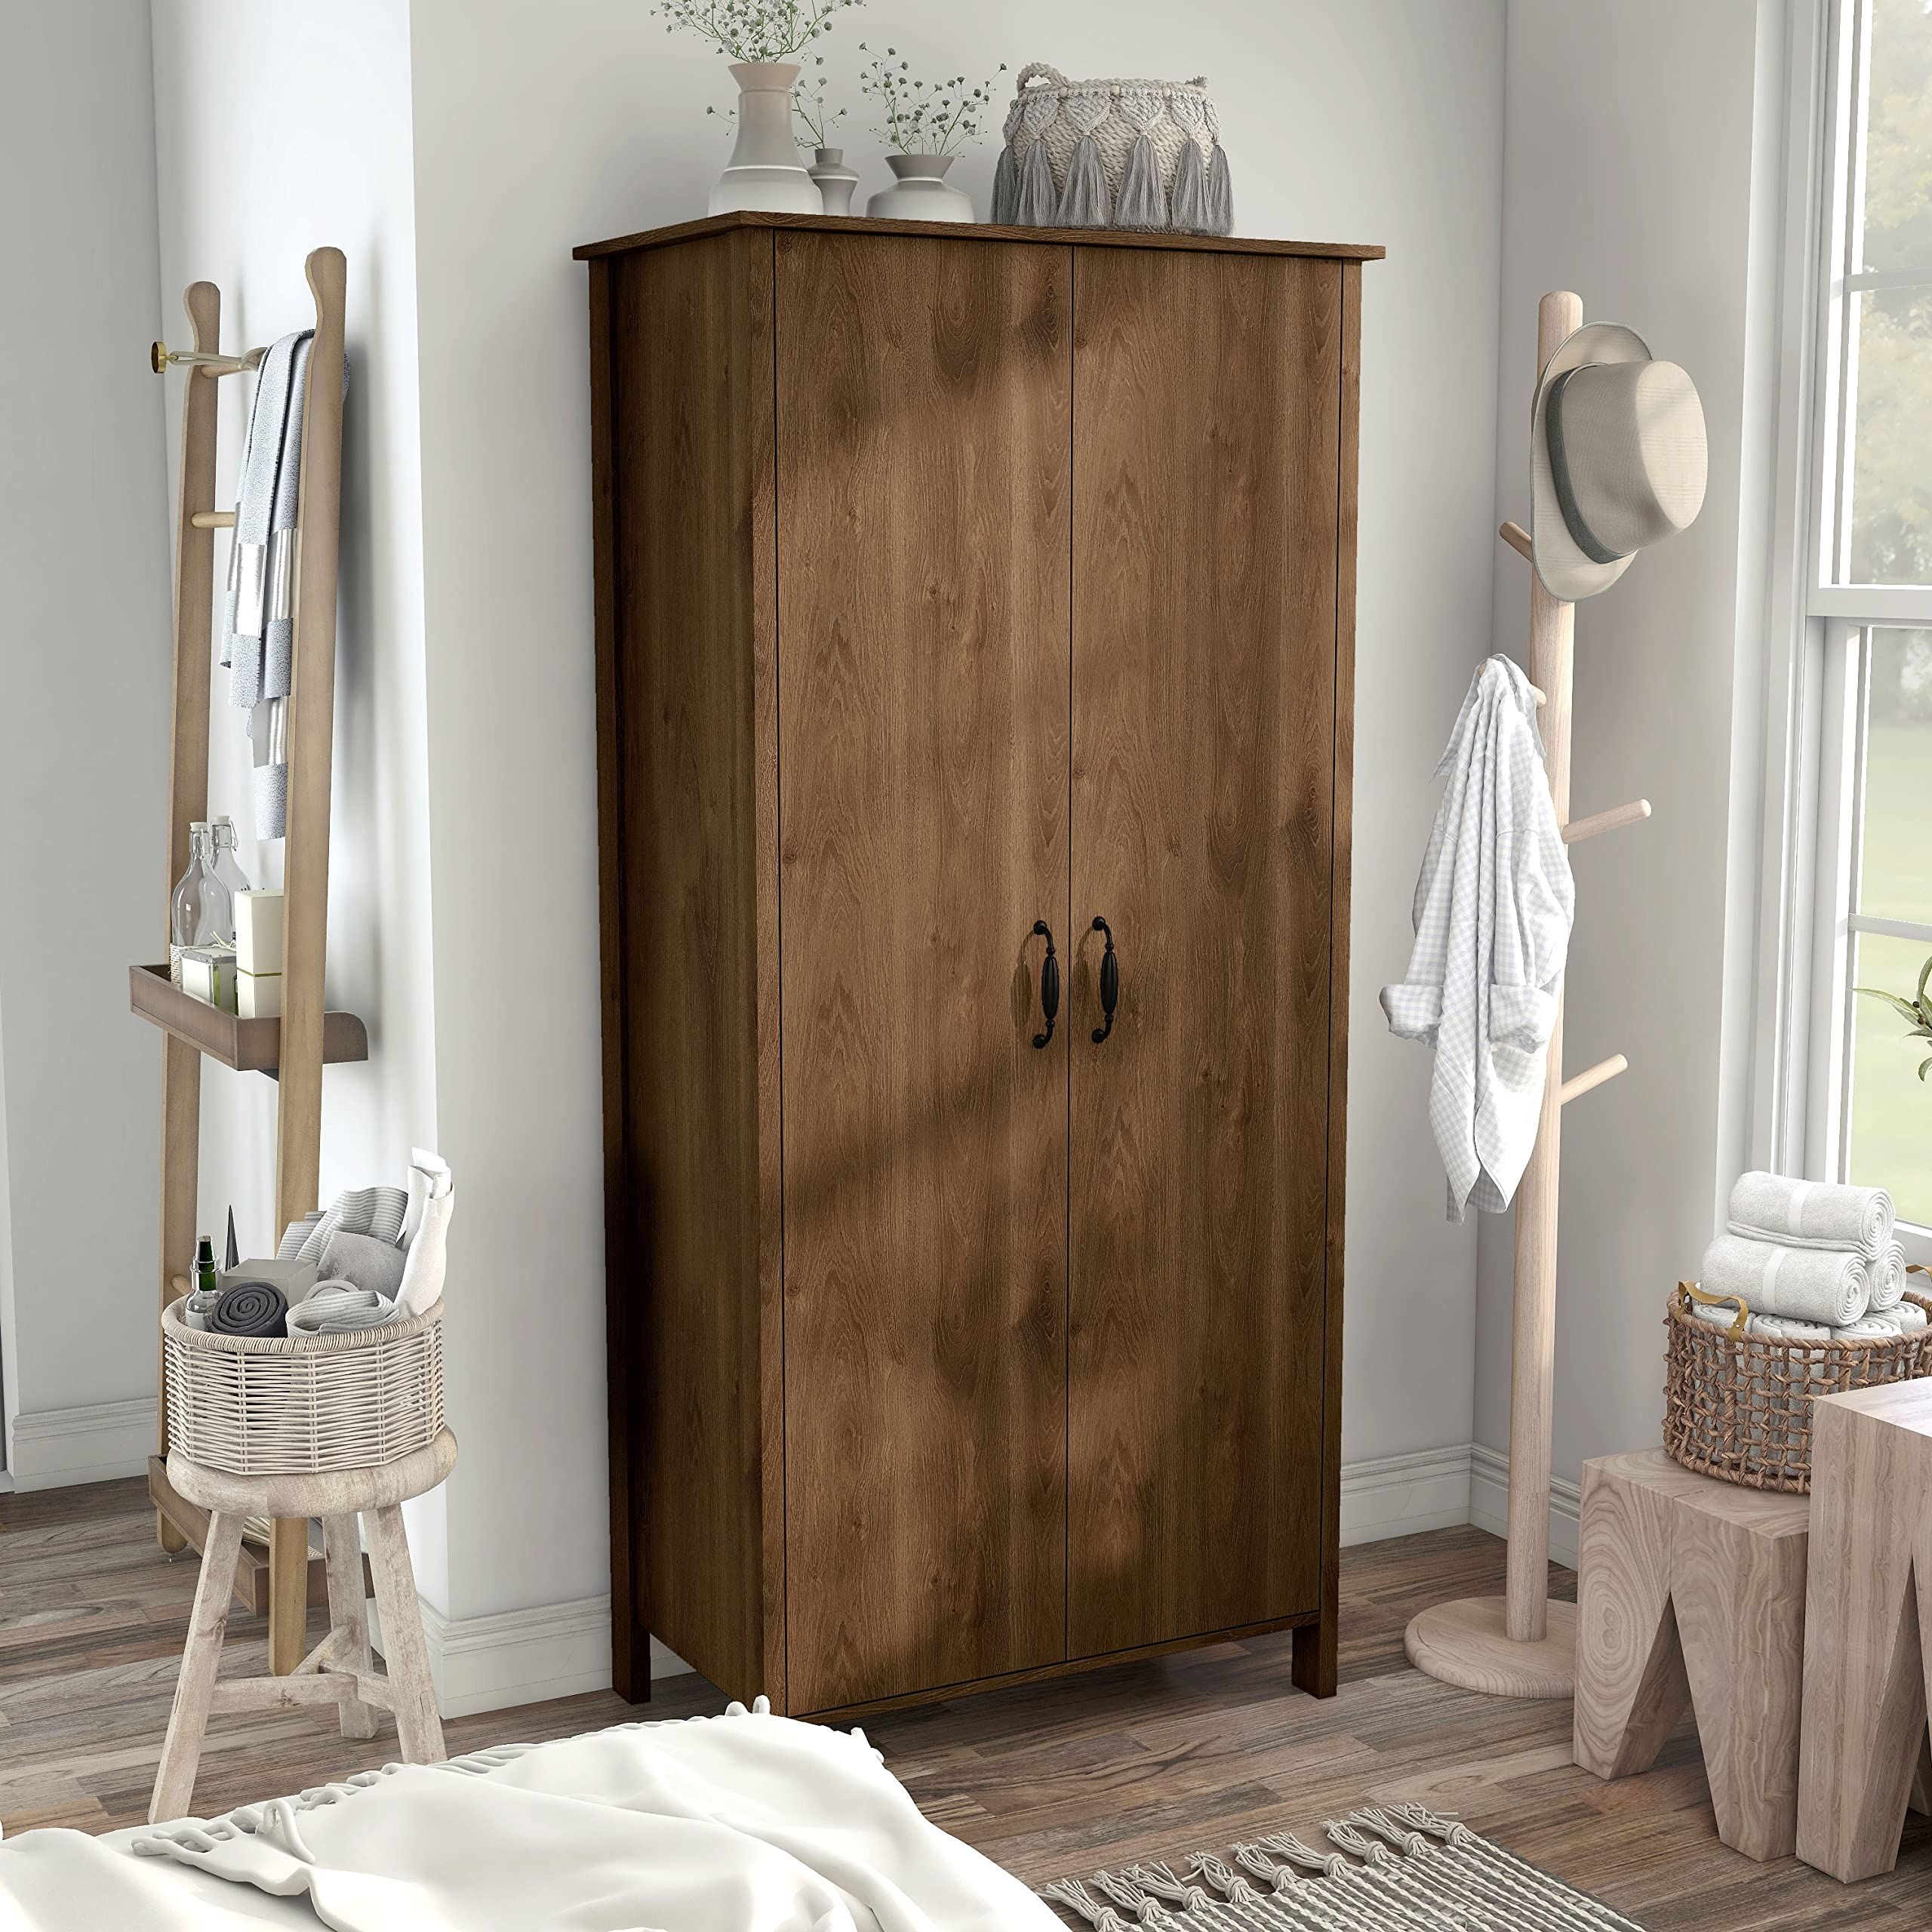 Amazon – Distressed Walnut Double Doors Wardrobe Closet With Shelves  Brown Traditional Transitional Mdf Within Popular Traditional Wardrobes (Photo 10 of 10)